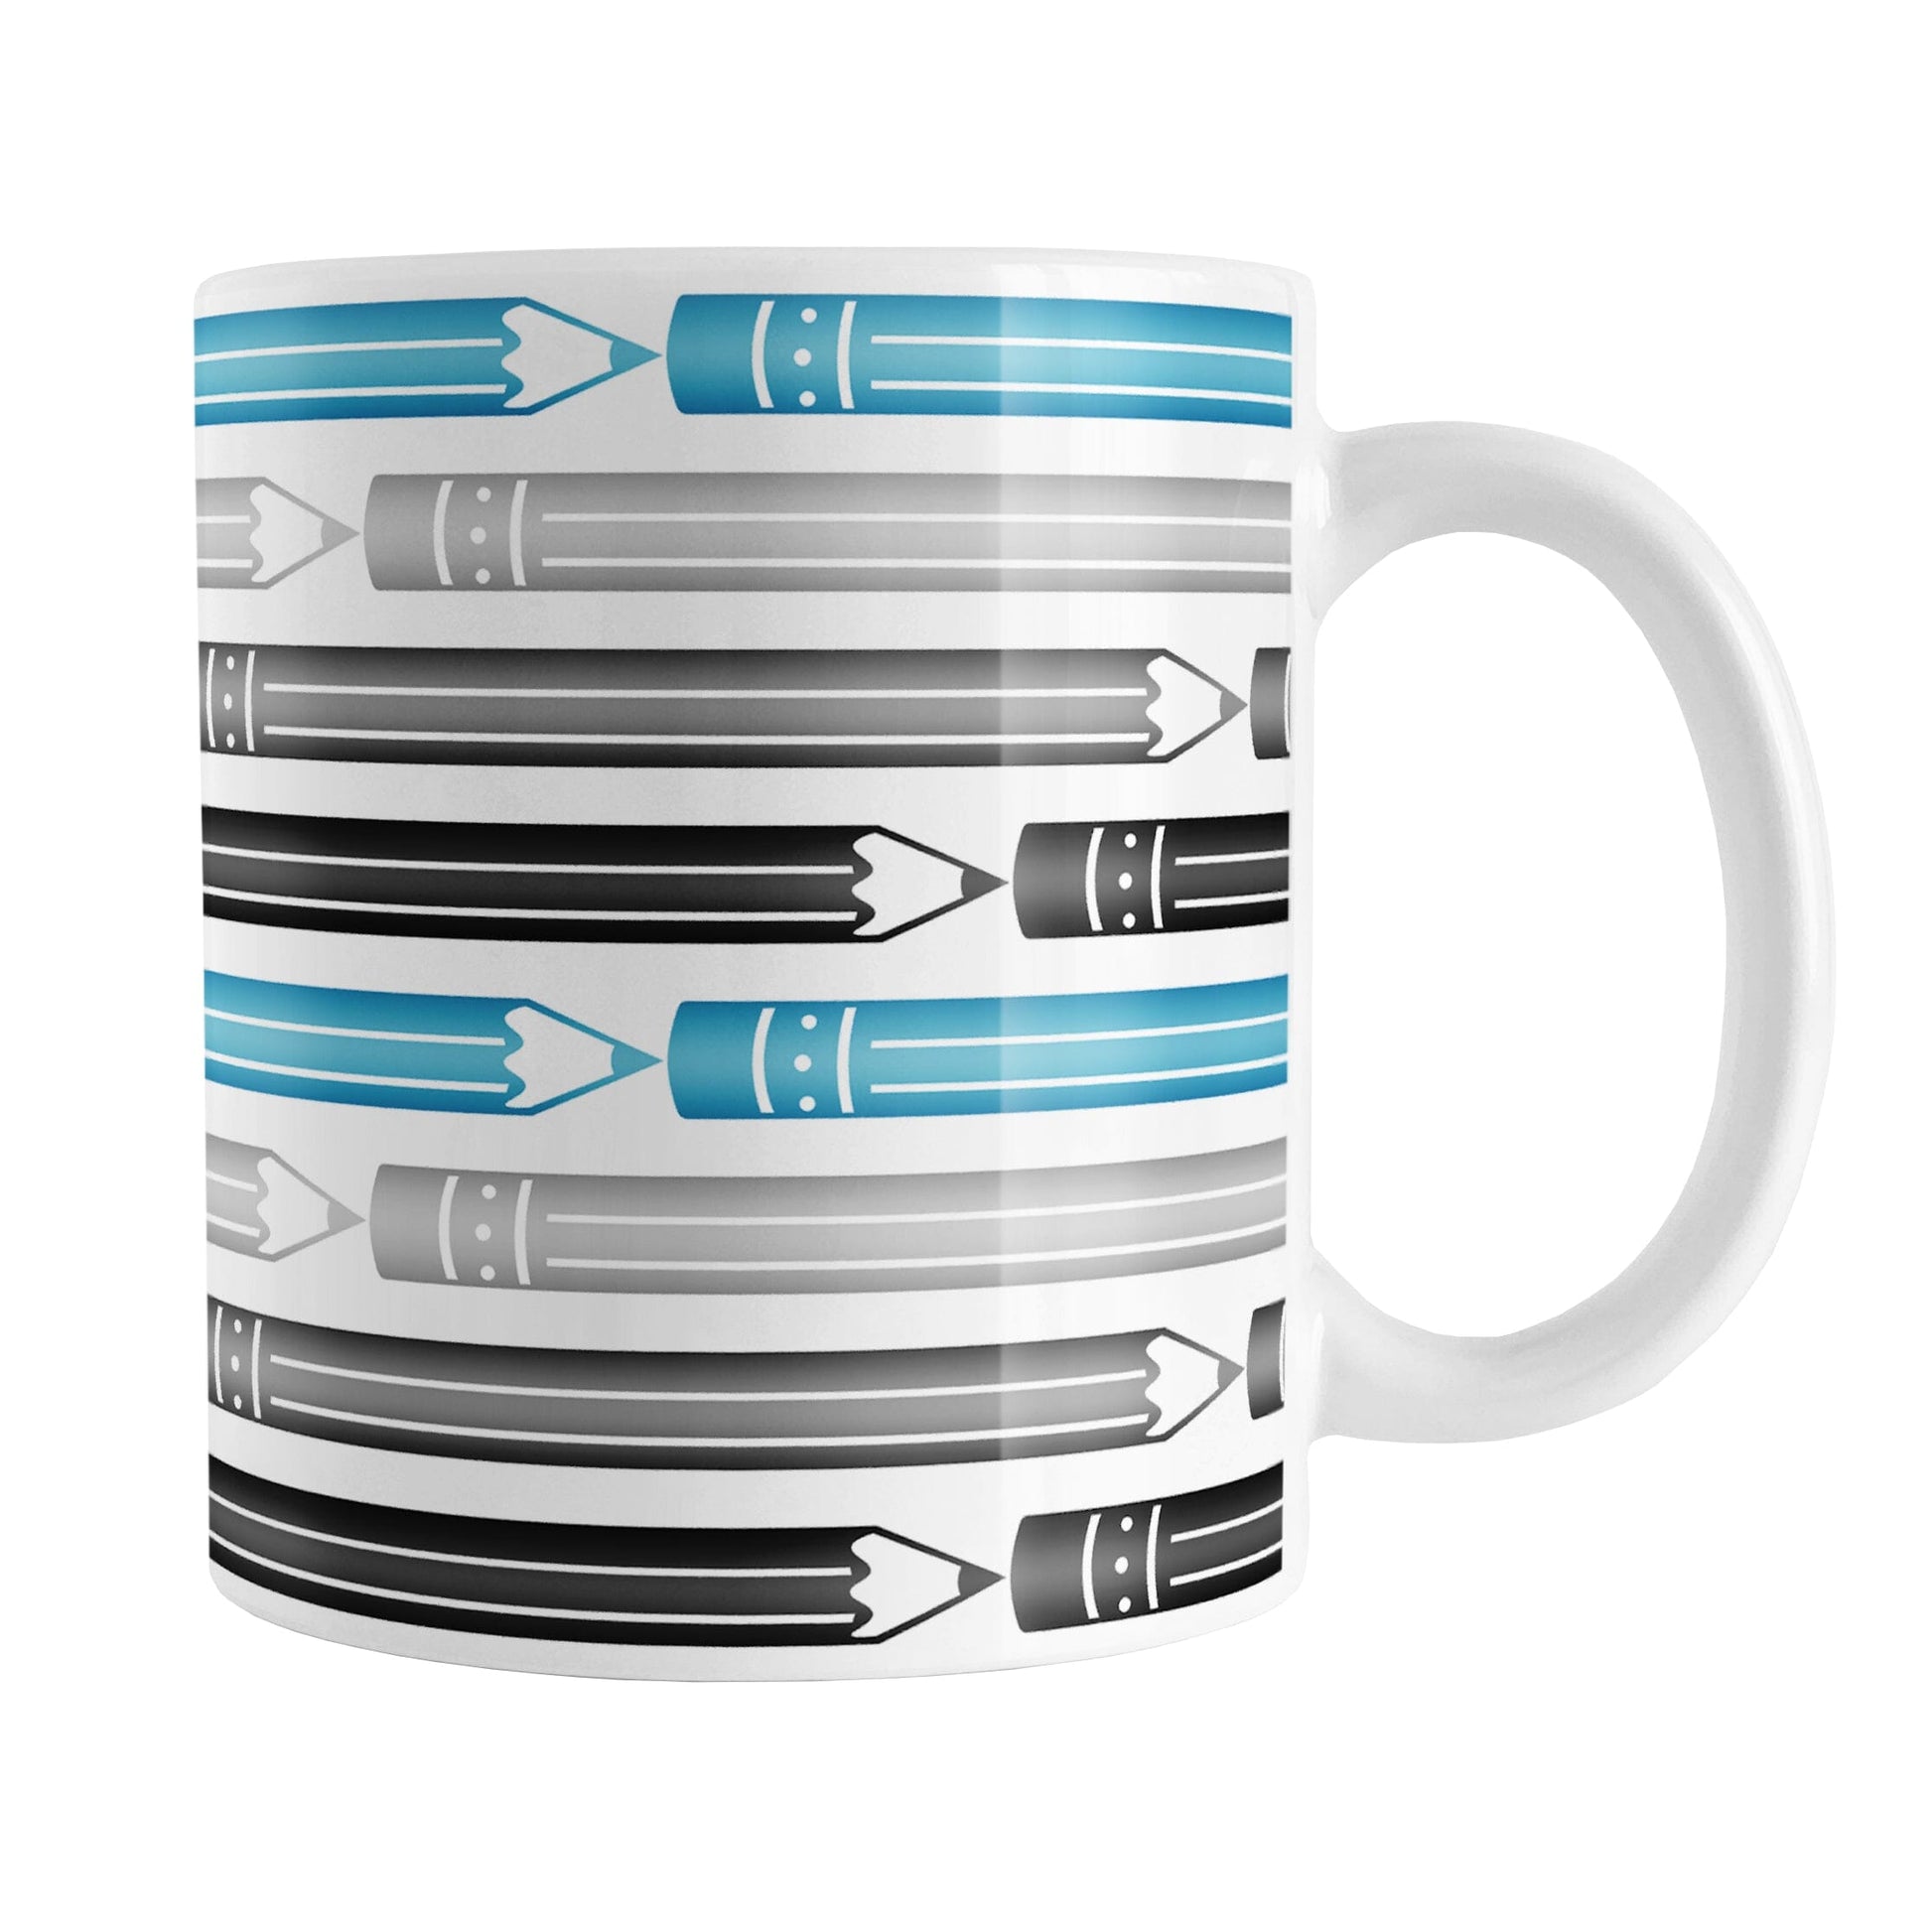 Blue Gray Black Pencils Pattern Mug (11oz) at Amy's Coffee Mugs. A ceramic coffee mug designed with a horizontal pencils in blue, gray, and black, stacked in a pattern that wraps around the mug to the handle.